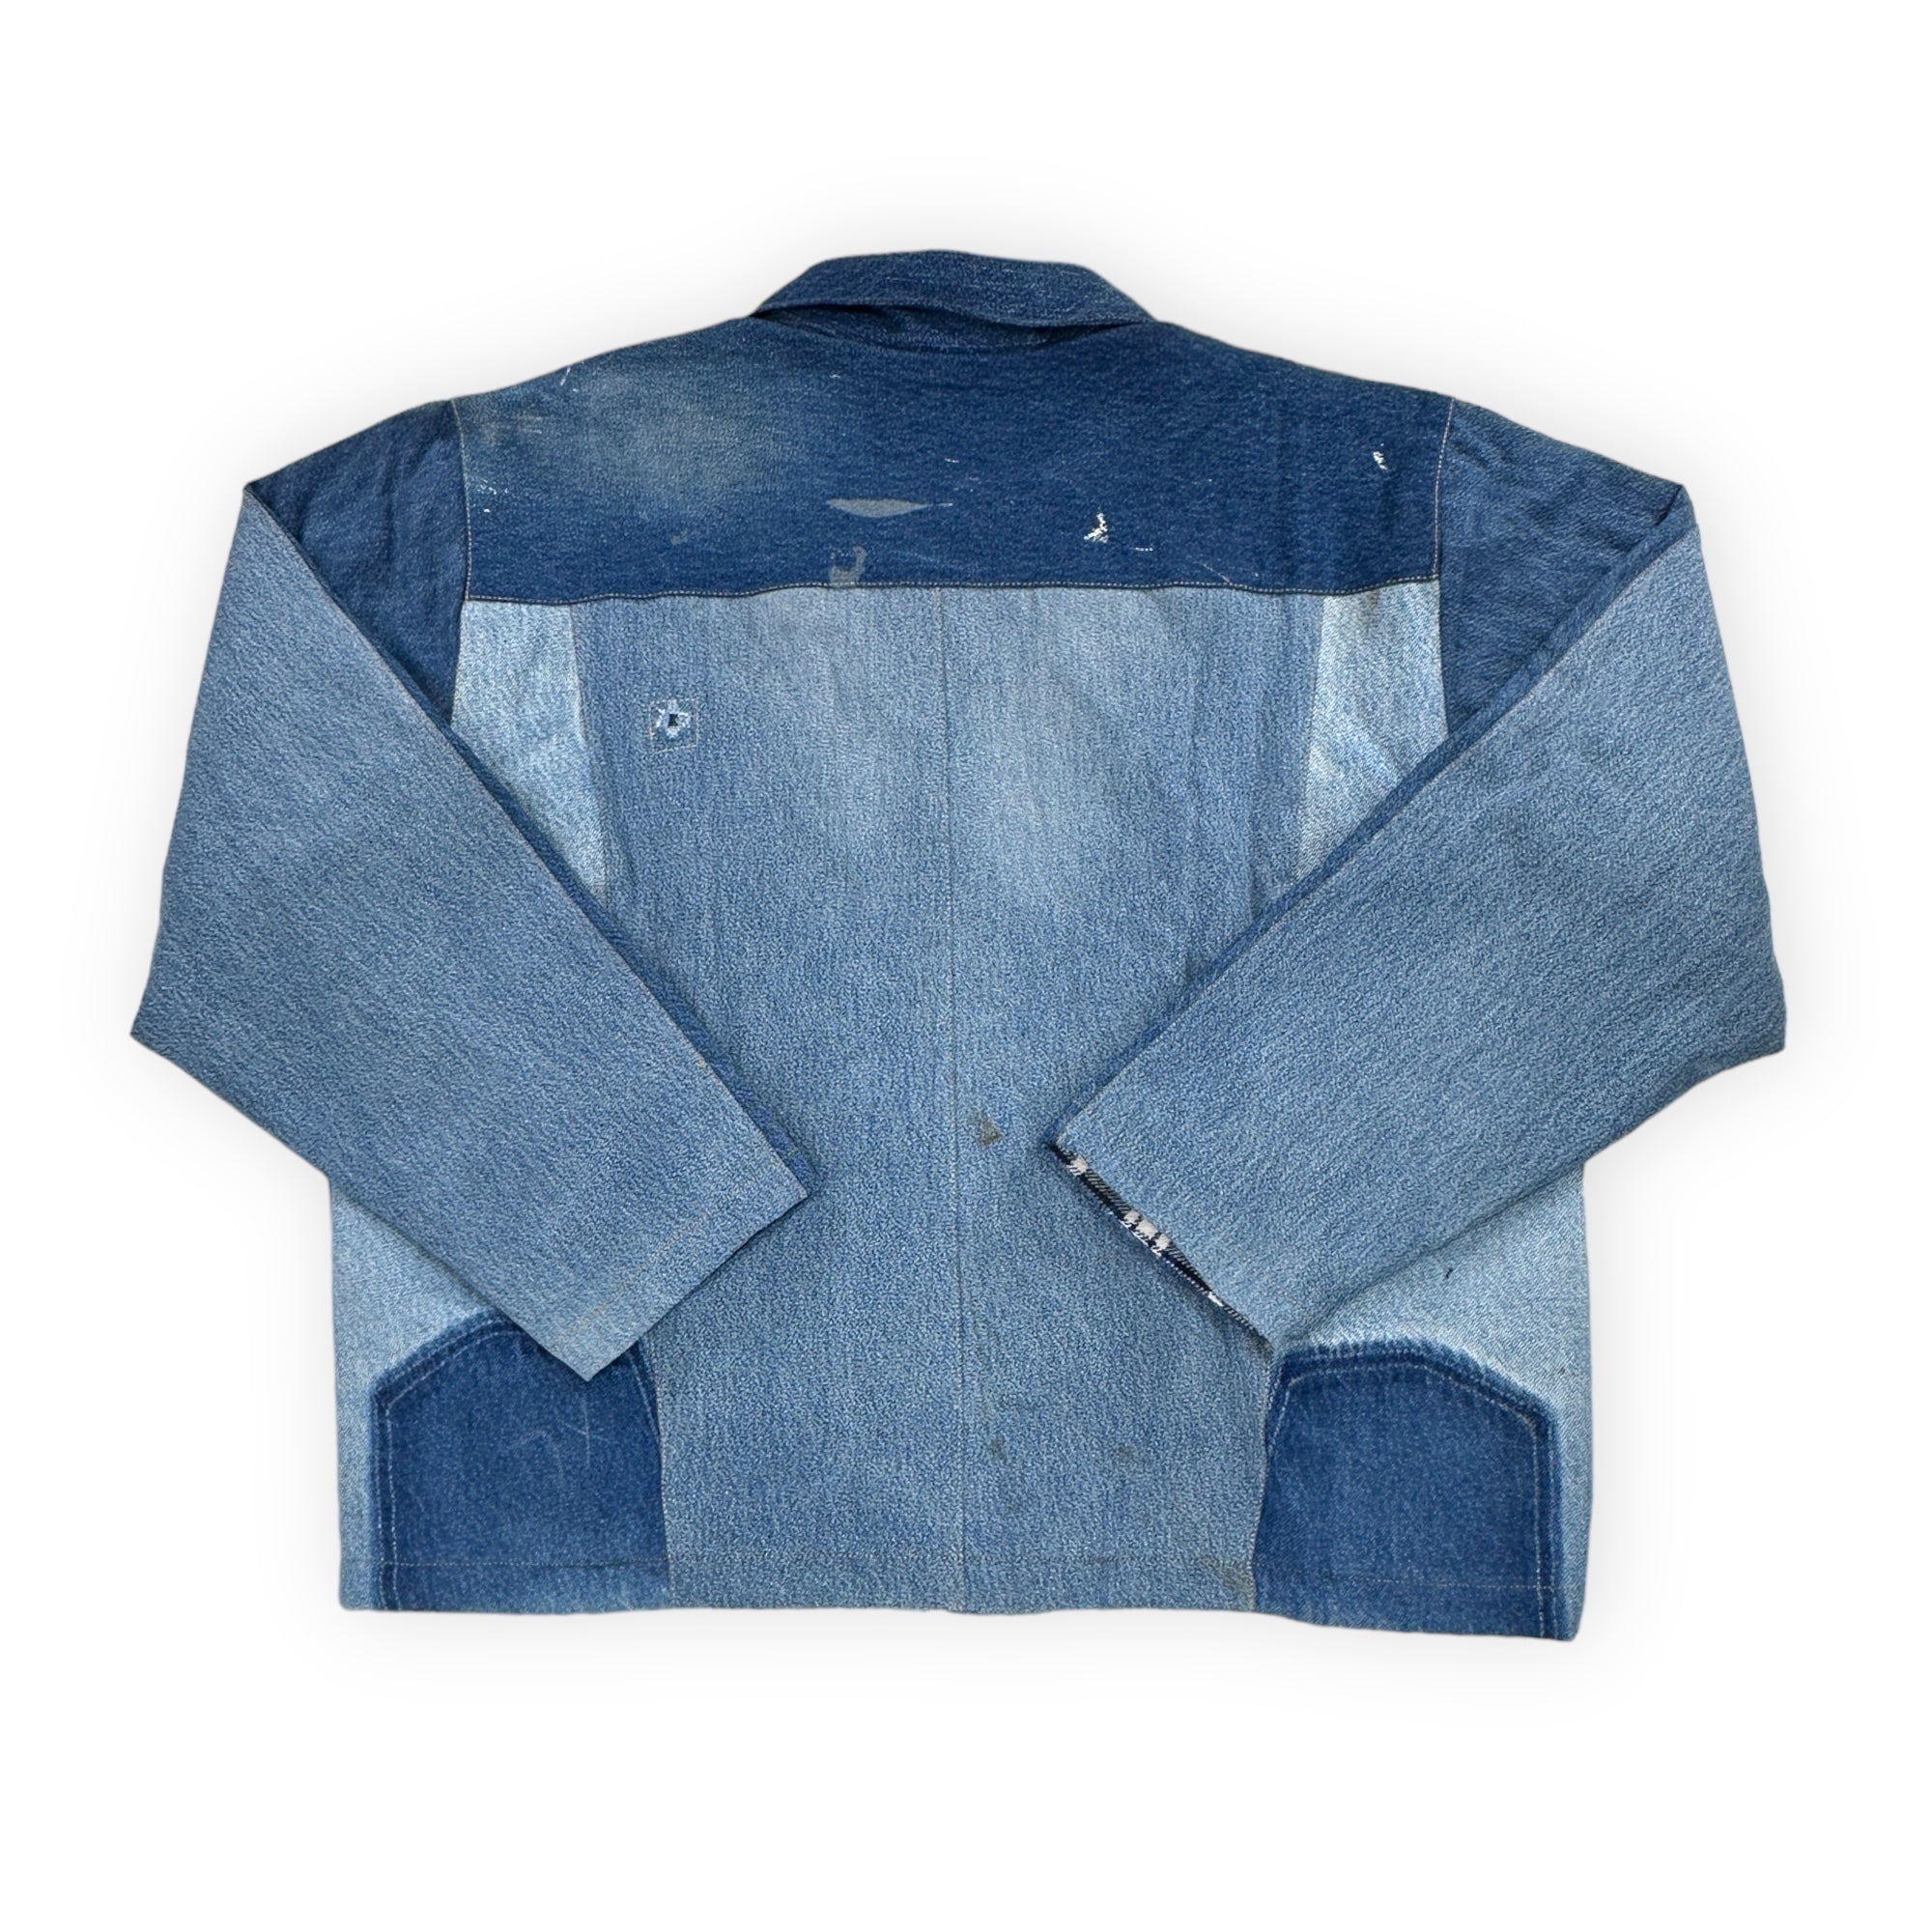 Chore Coat Made From Upcycled Work Jeans - XL - 0